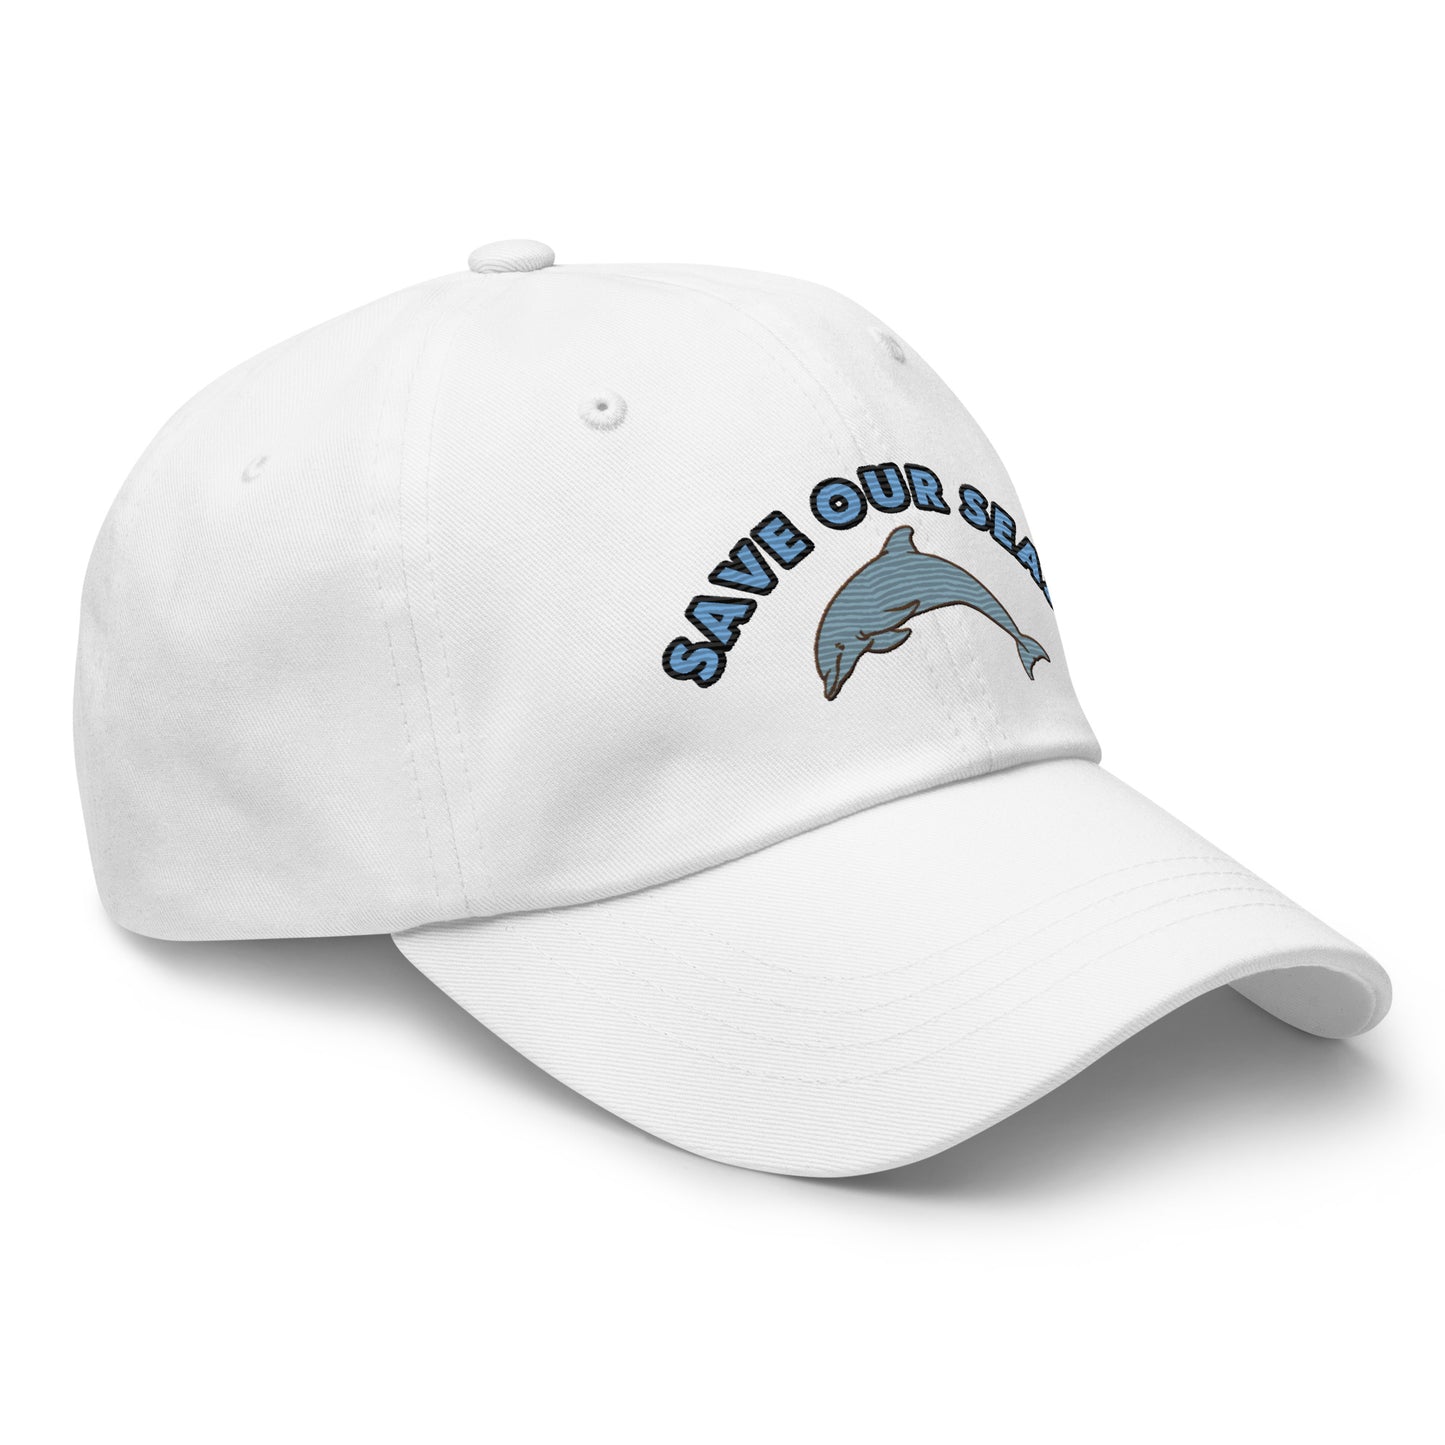 Save Our Seas Dolphin Dad hat: Pulls 4 pounds of ocean plastic!